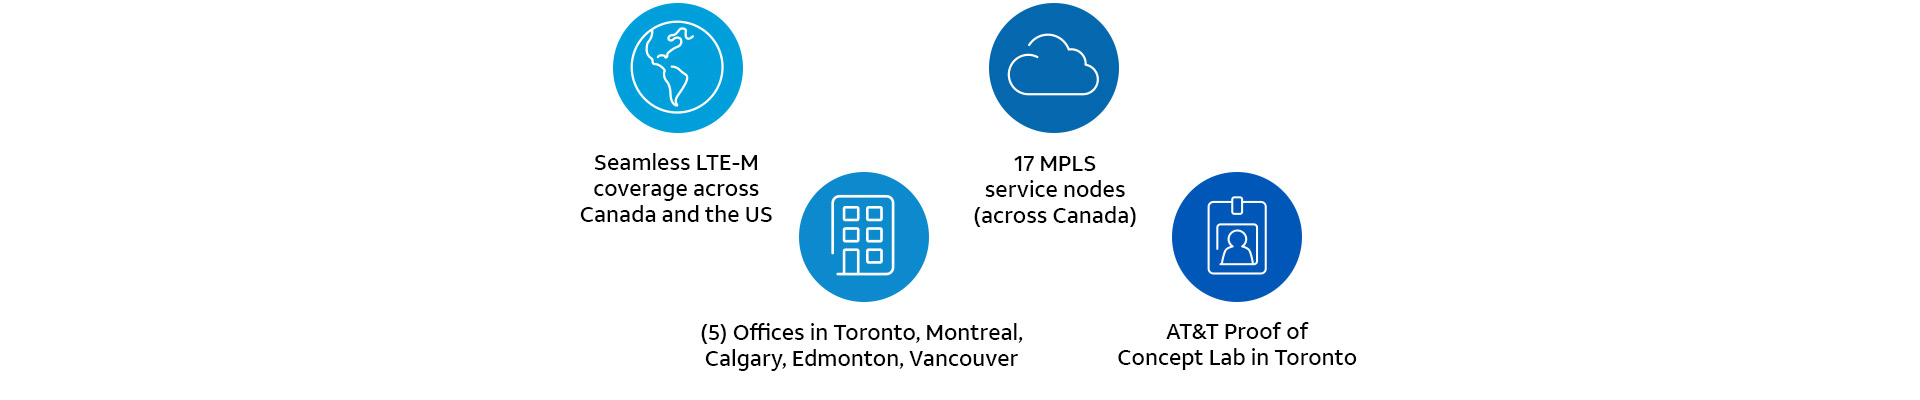 Supplying seamless LTE-M coverage with 17 MPLS service nodes across Canada